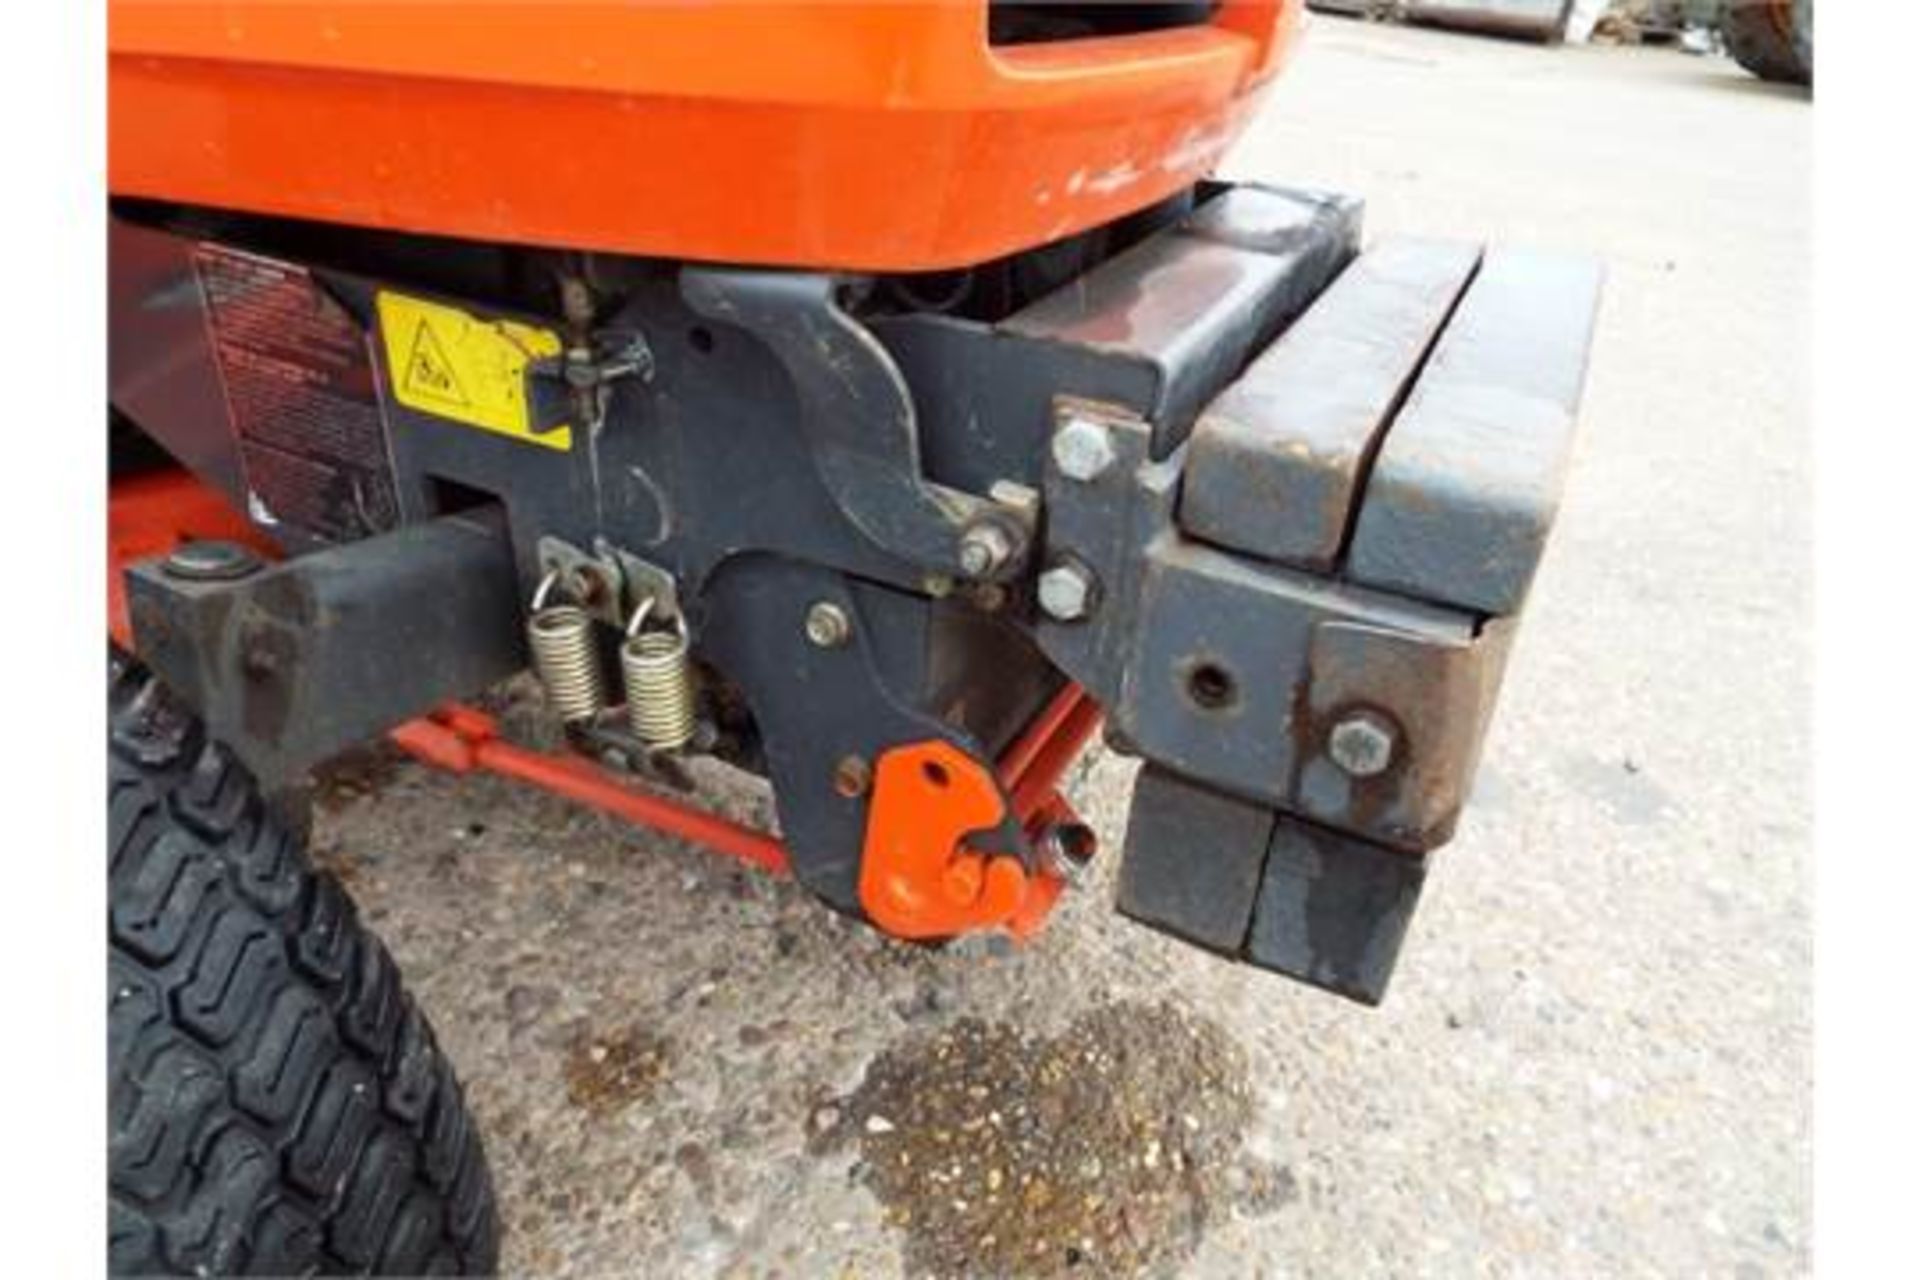 2008 Kubota G21 Ride On Mower with Glide-Cut System and High Dump Grass Collector - Image 18 of 22